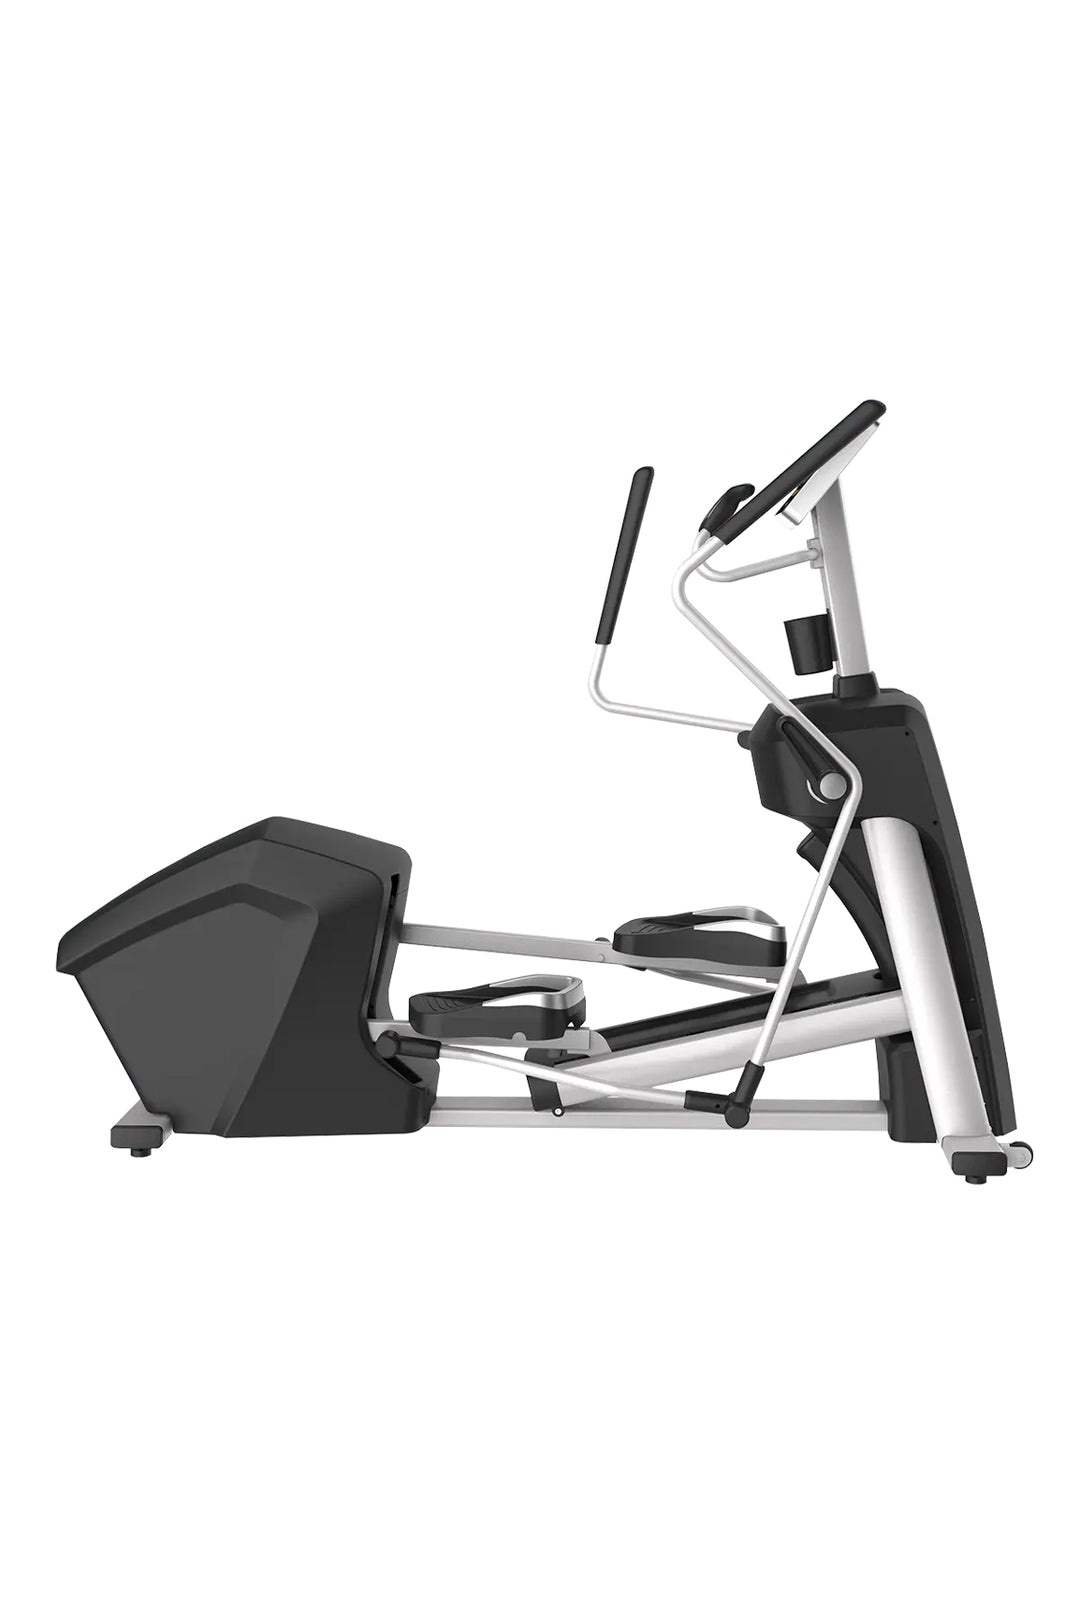 Body Iron Commercial Pro Elliptical Cross Trainer (Floor Model PICK UP ONLY MELBOURNE)